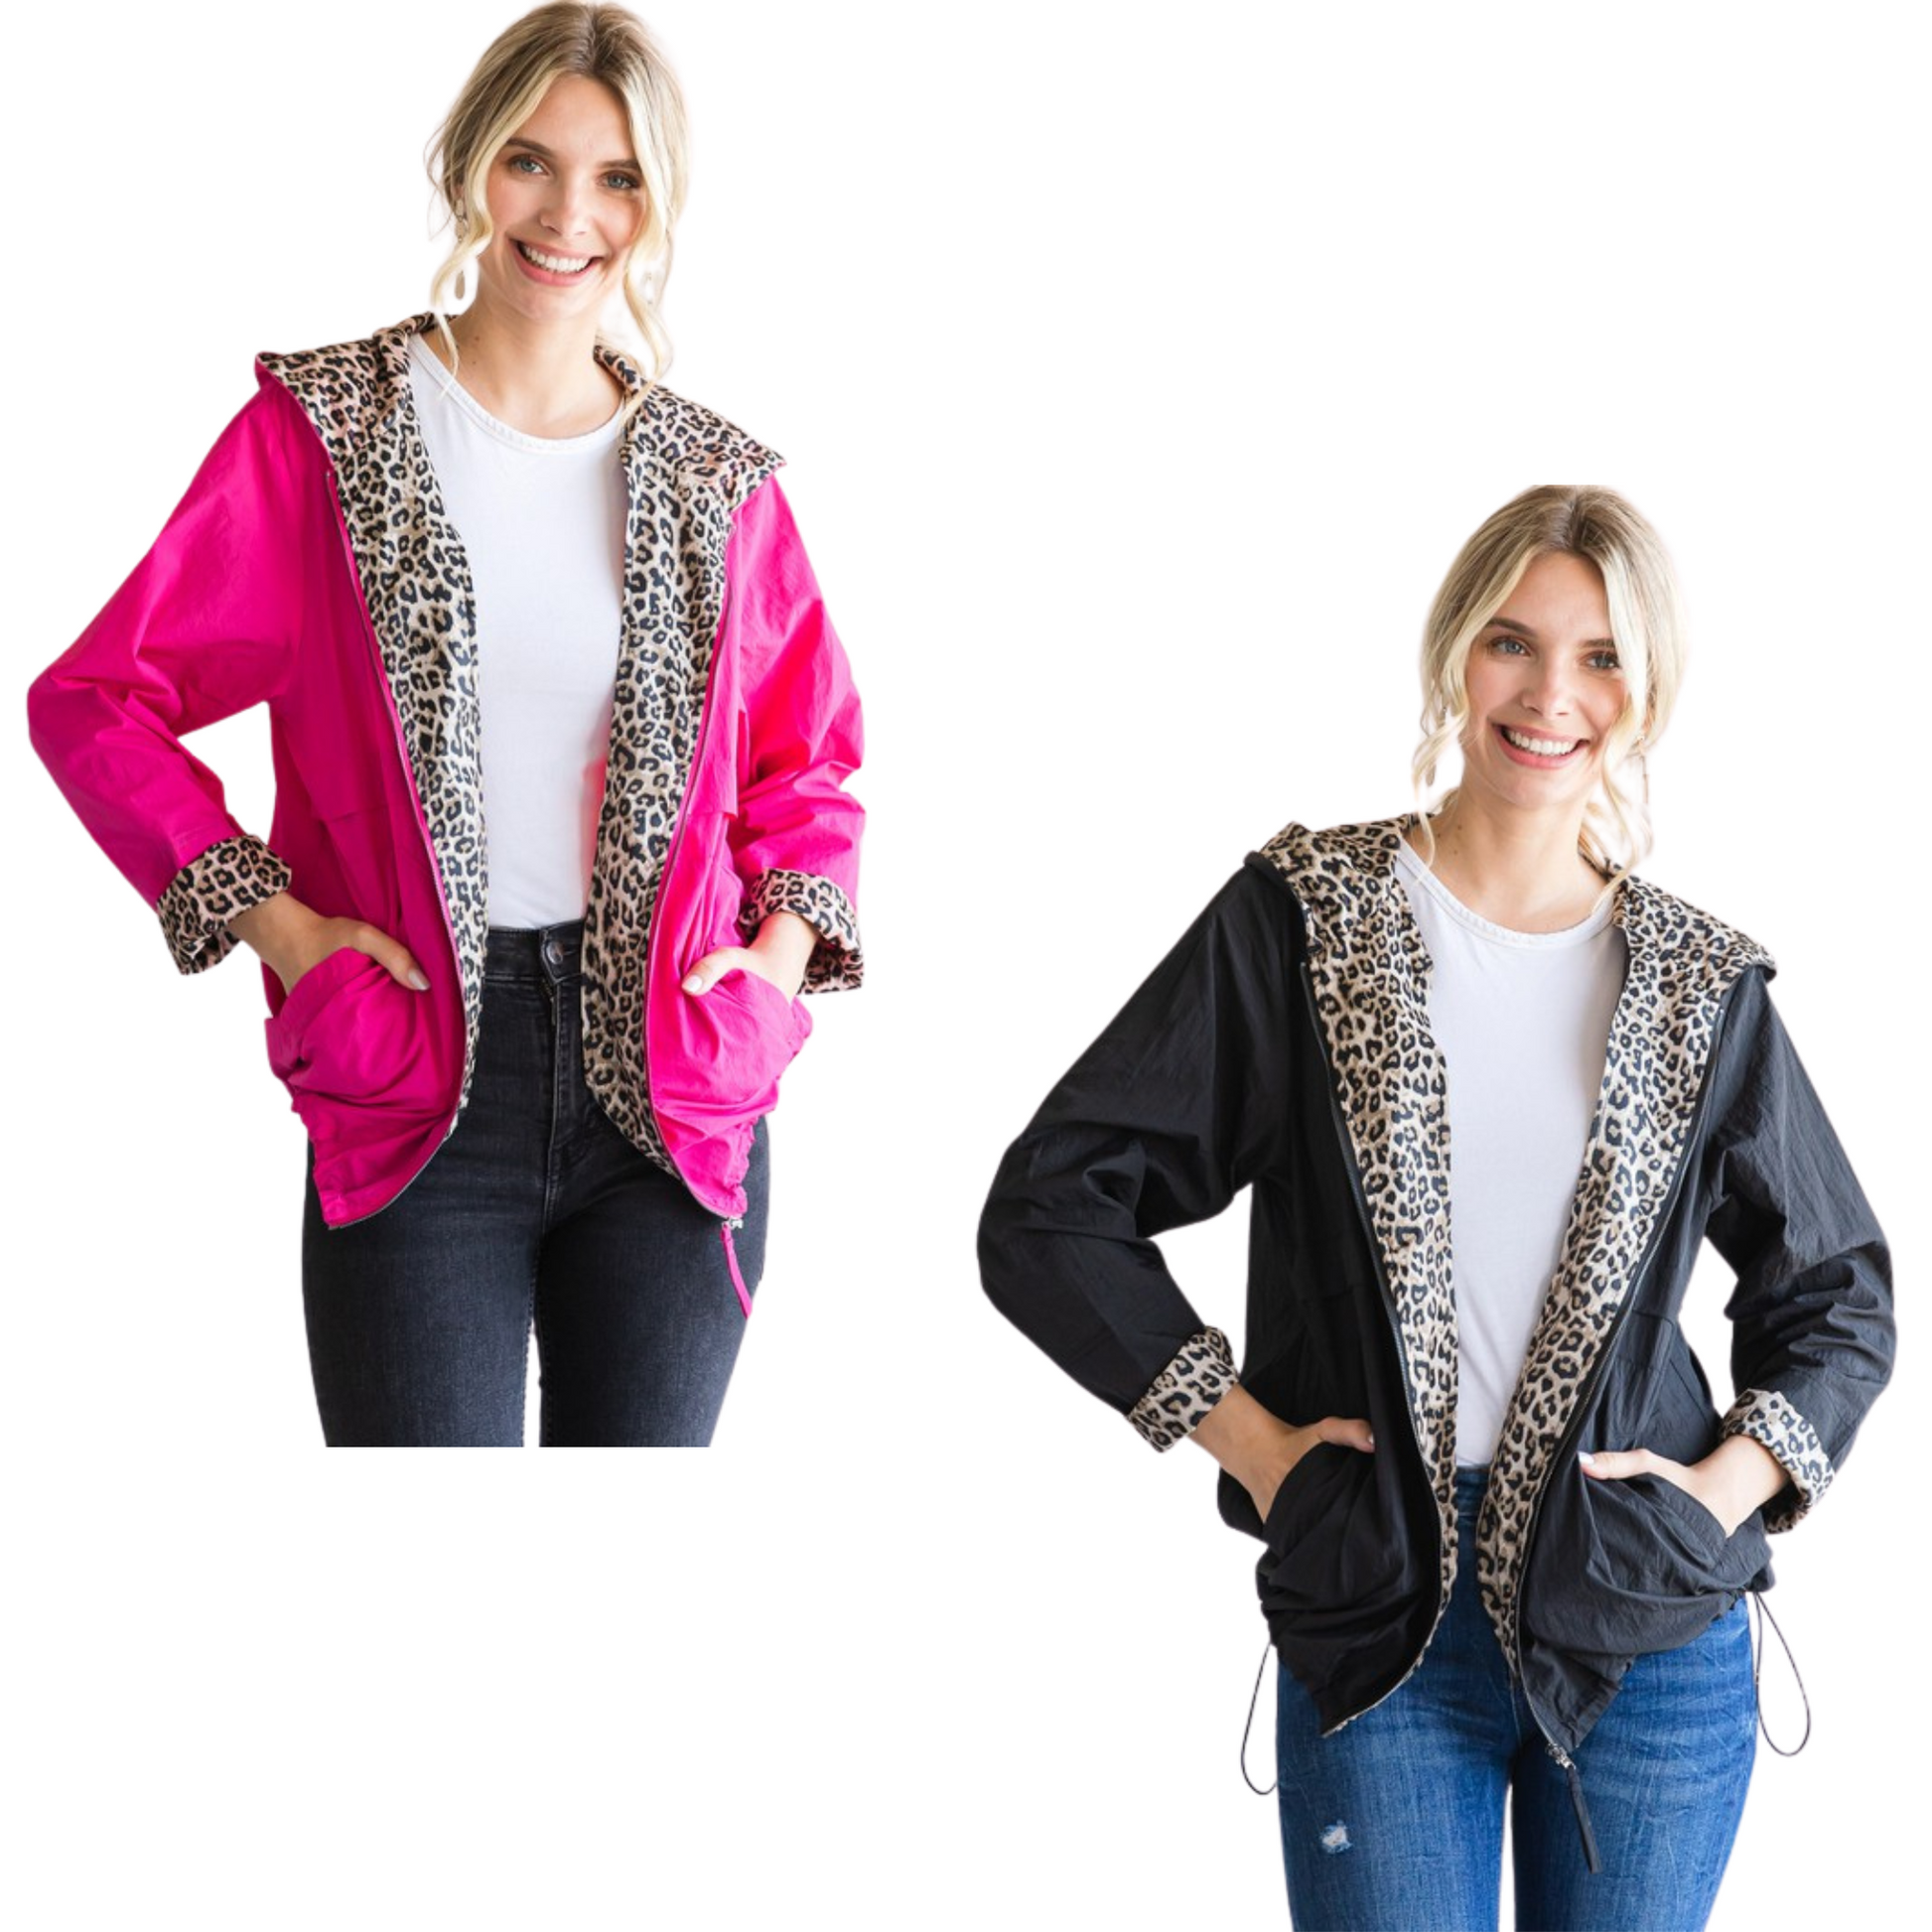 This plus Leopard Lined Windbreaker is perfect for any active lifestyle. It features long sleeves with leopard print on the end of each sleeve and a drawstring hood lined with leopard print. The lightweight fabric and drawstring hemline hold in warmth without sacrificing breathability. Available in either hot pink or black.